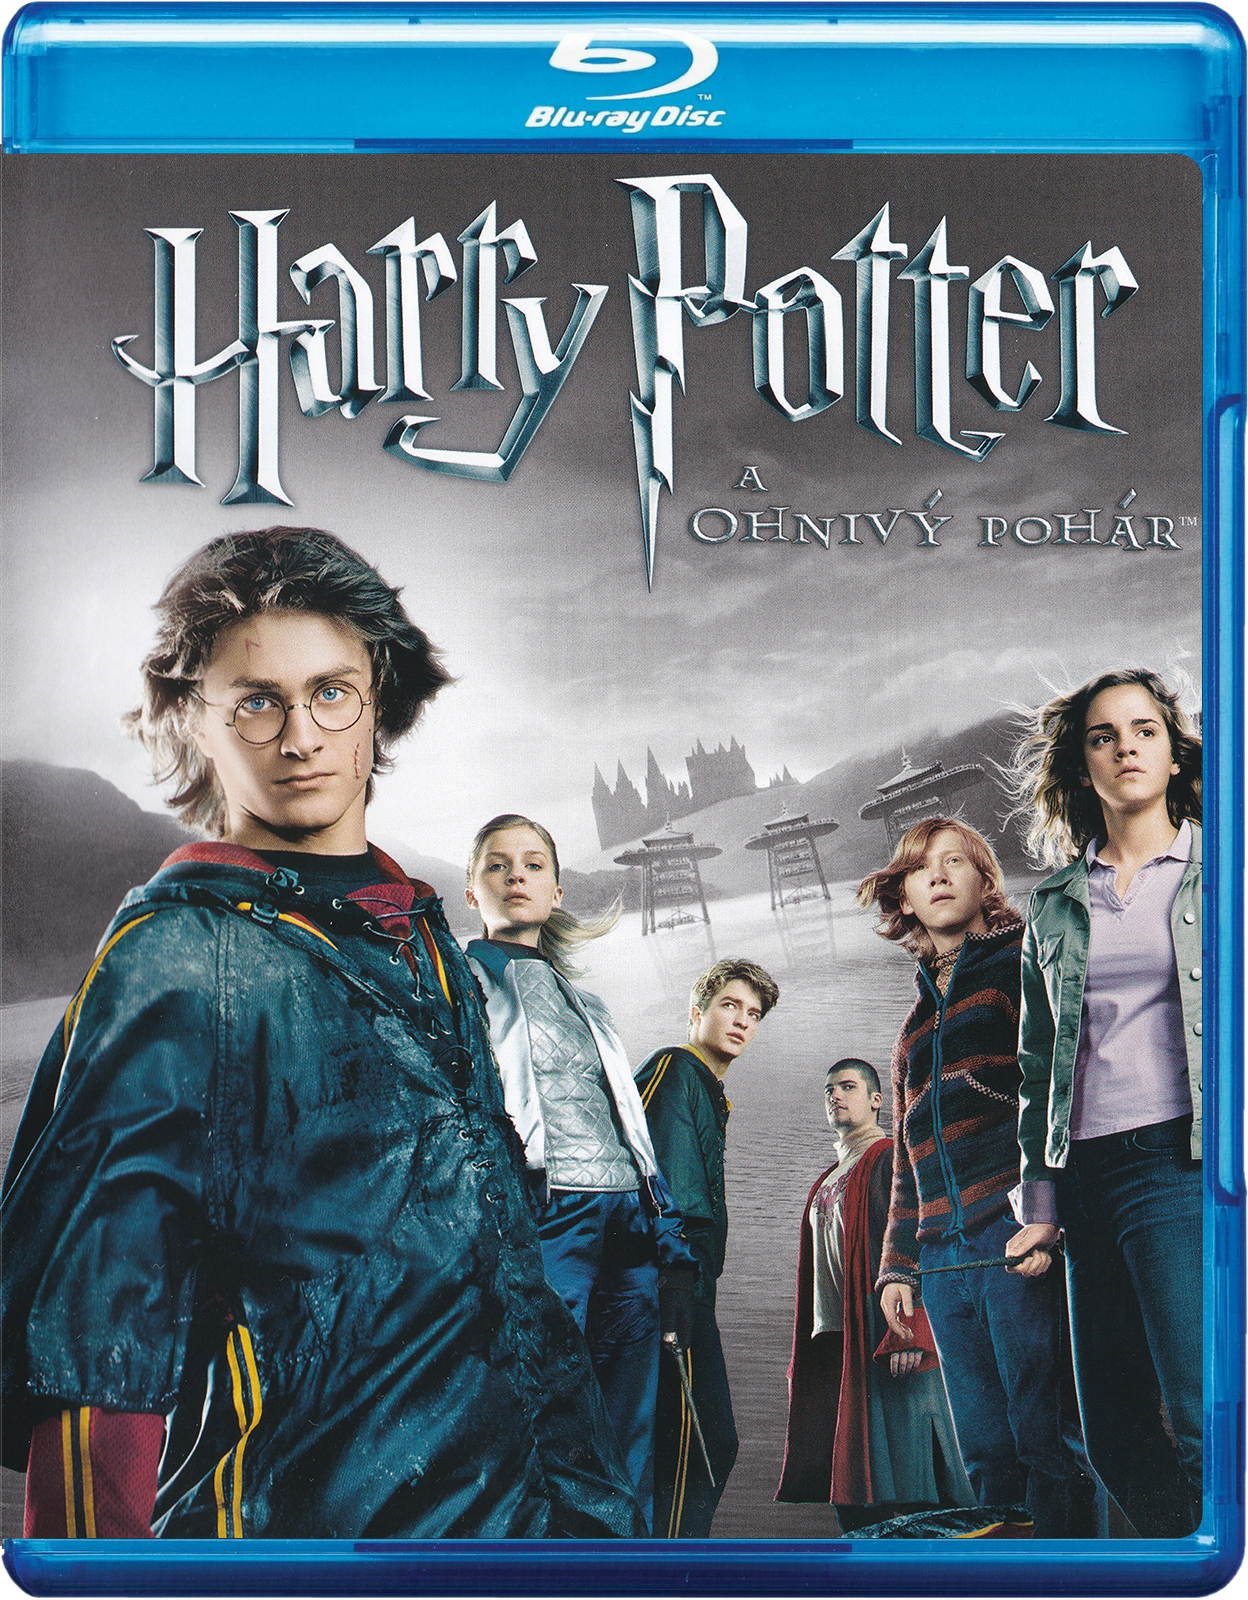 Stiahni si HD Filmy Harry Potter a Ohnivy pohar / Harry Potter and the Goblet of Fire (2005)(CZ/EN)  = CSFD 79%